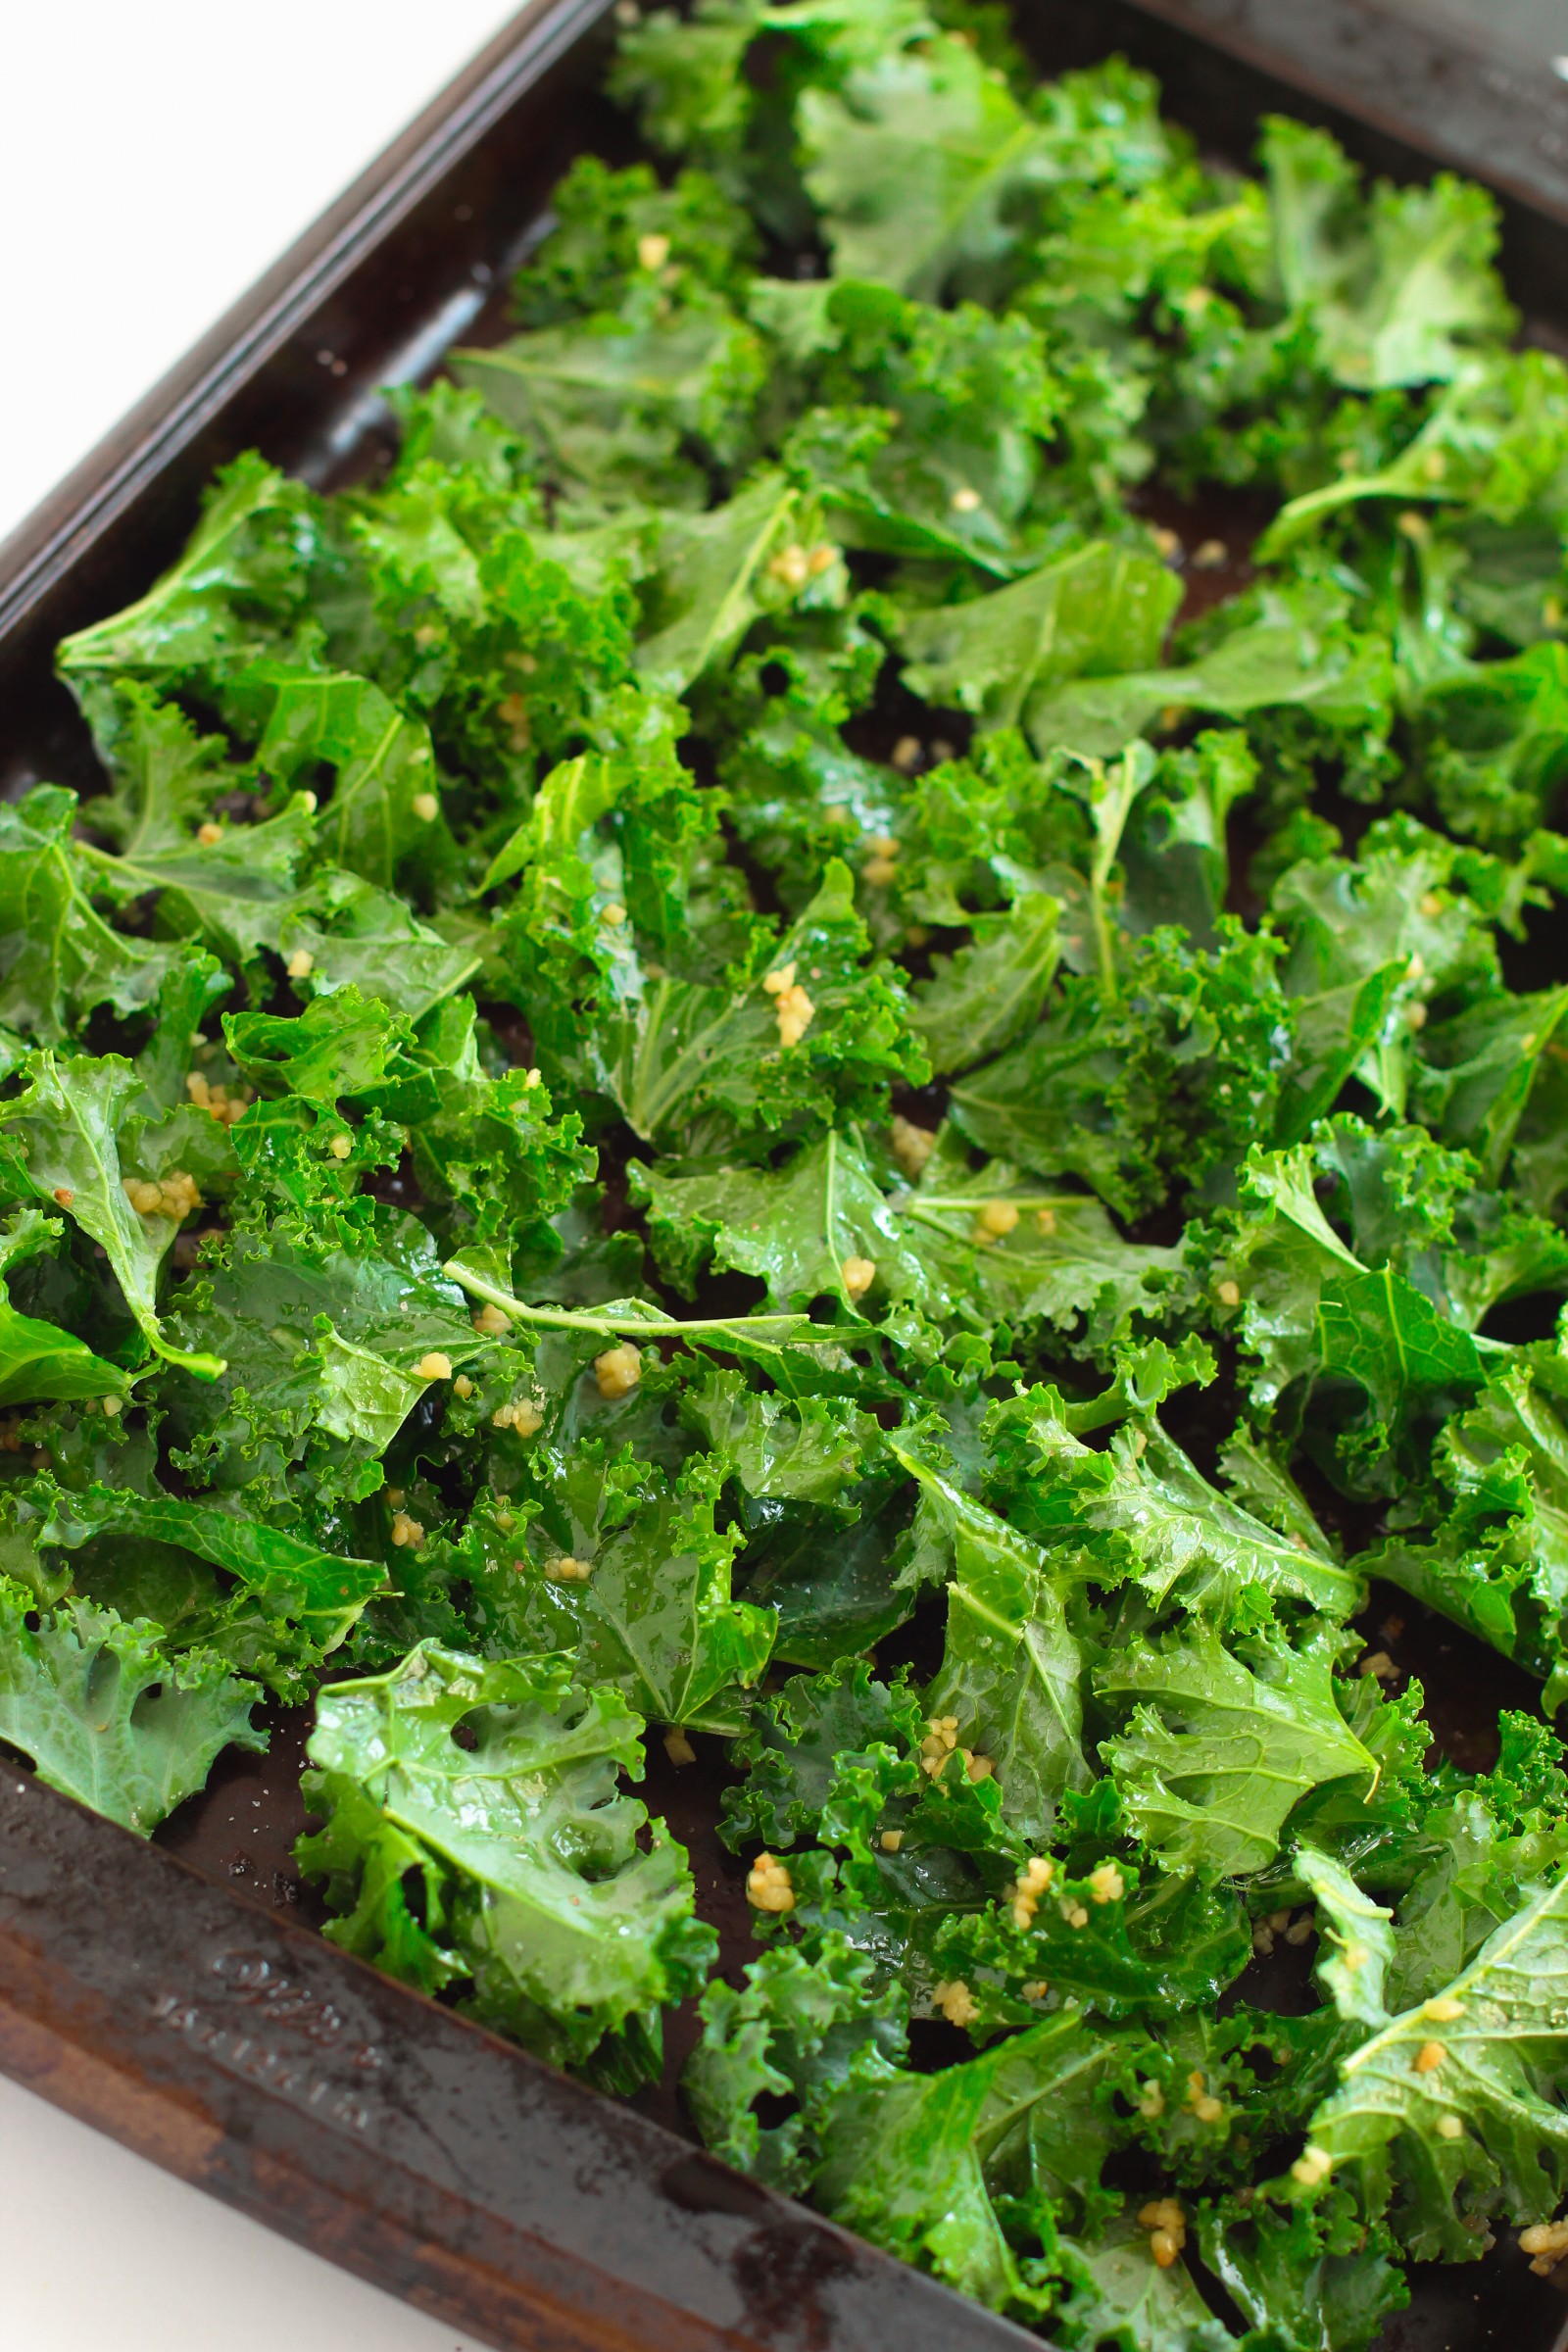 Raw kale on a baking sheet to be baked.